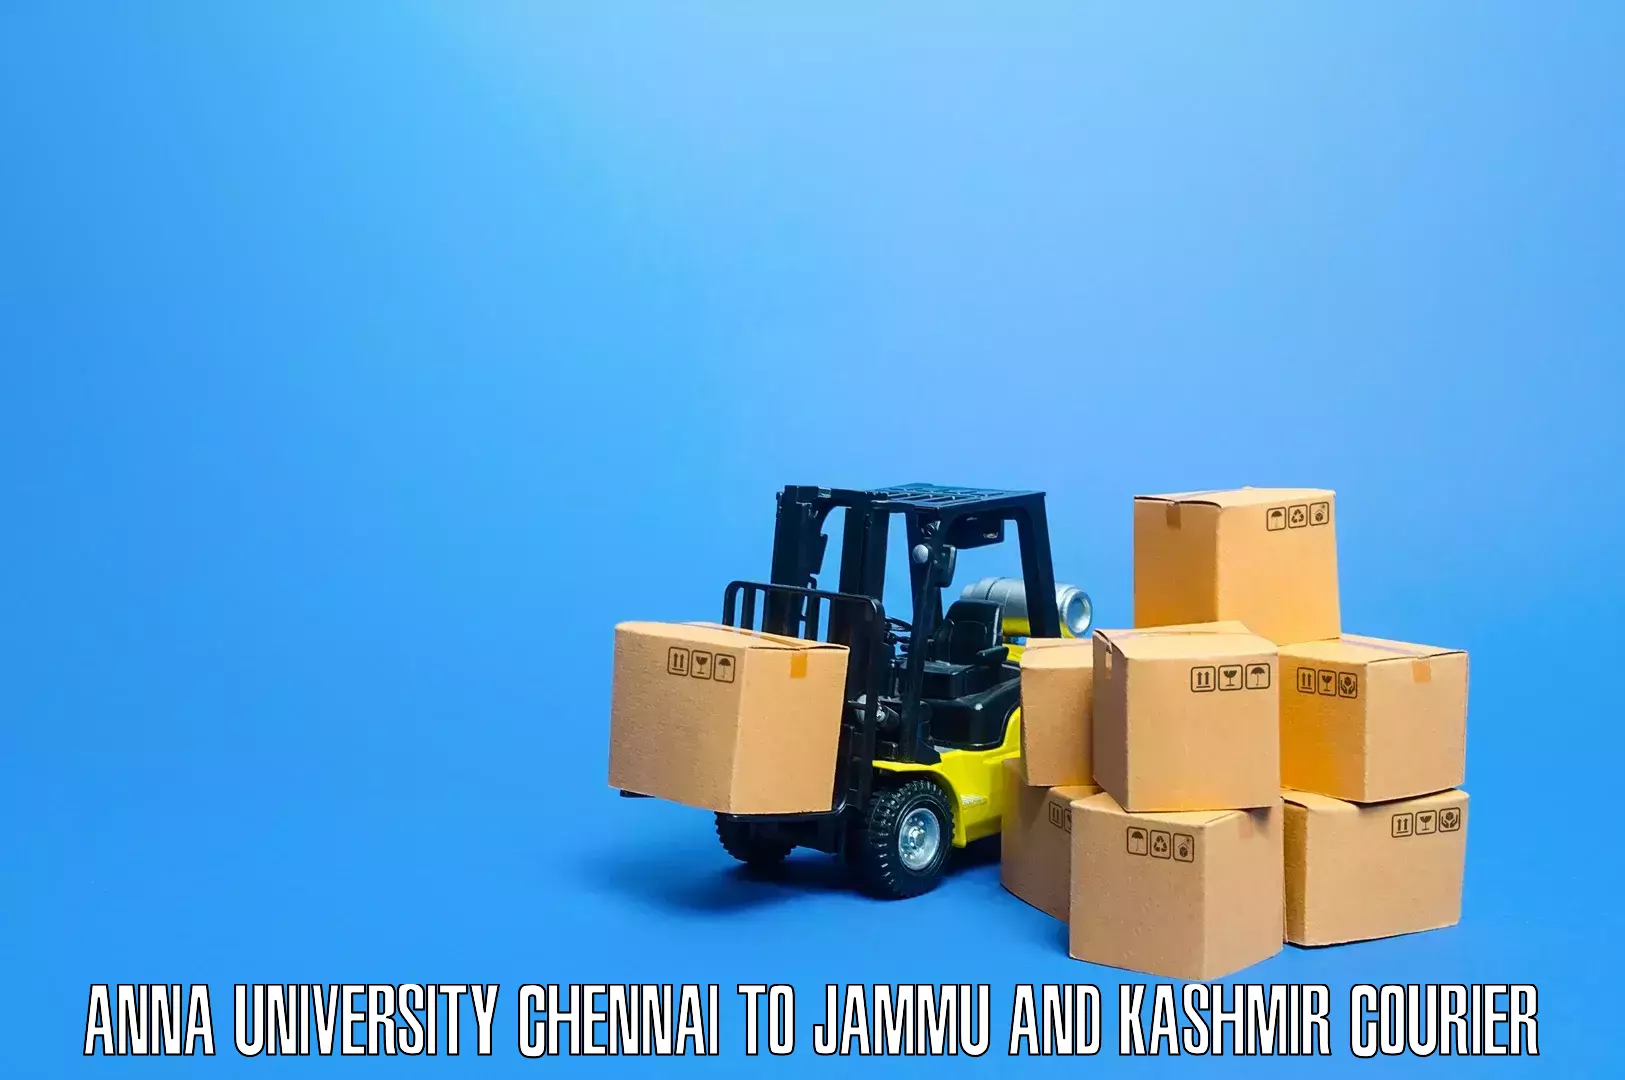 Tailored relocation services in Anna University Chennai to Jammu and Kashmir